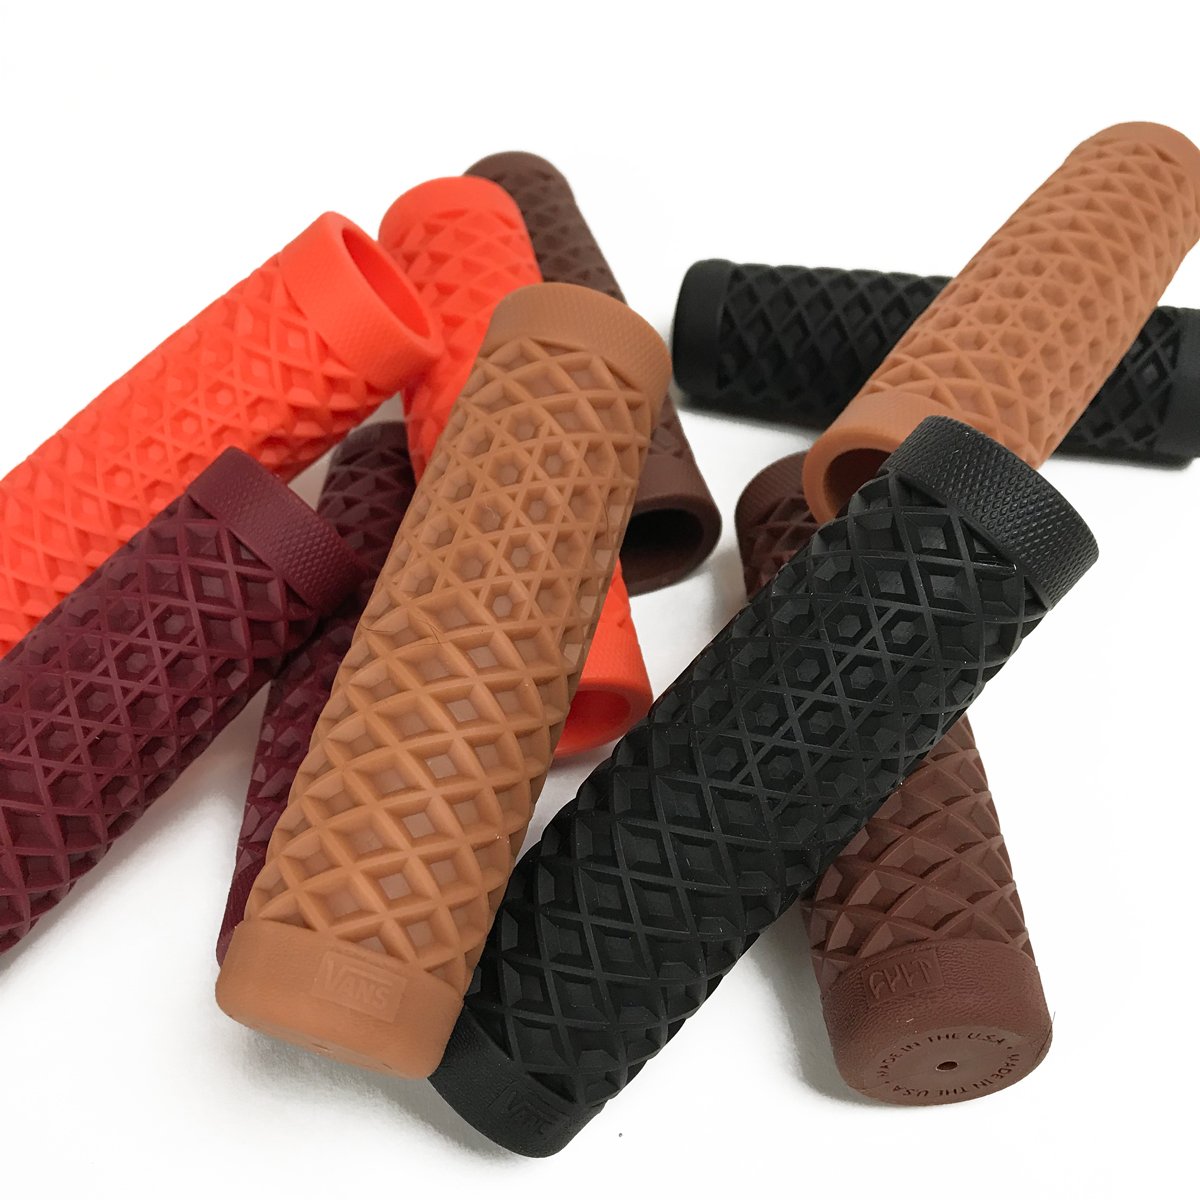 A group of Vans + Cult Motorcycle Grips - 7/8" Brown by ODI on a white surface.